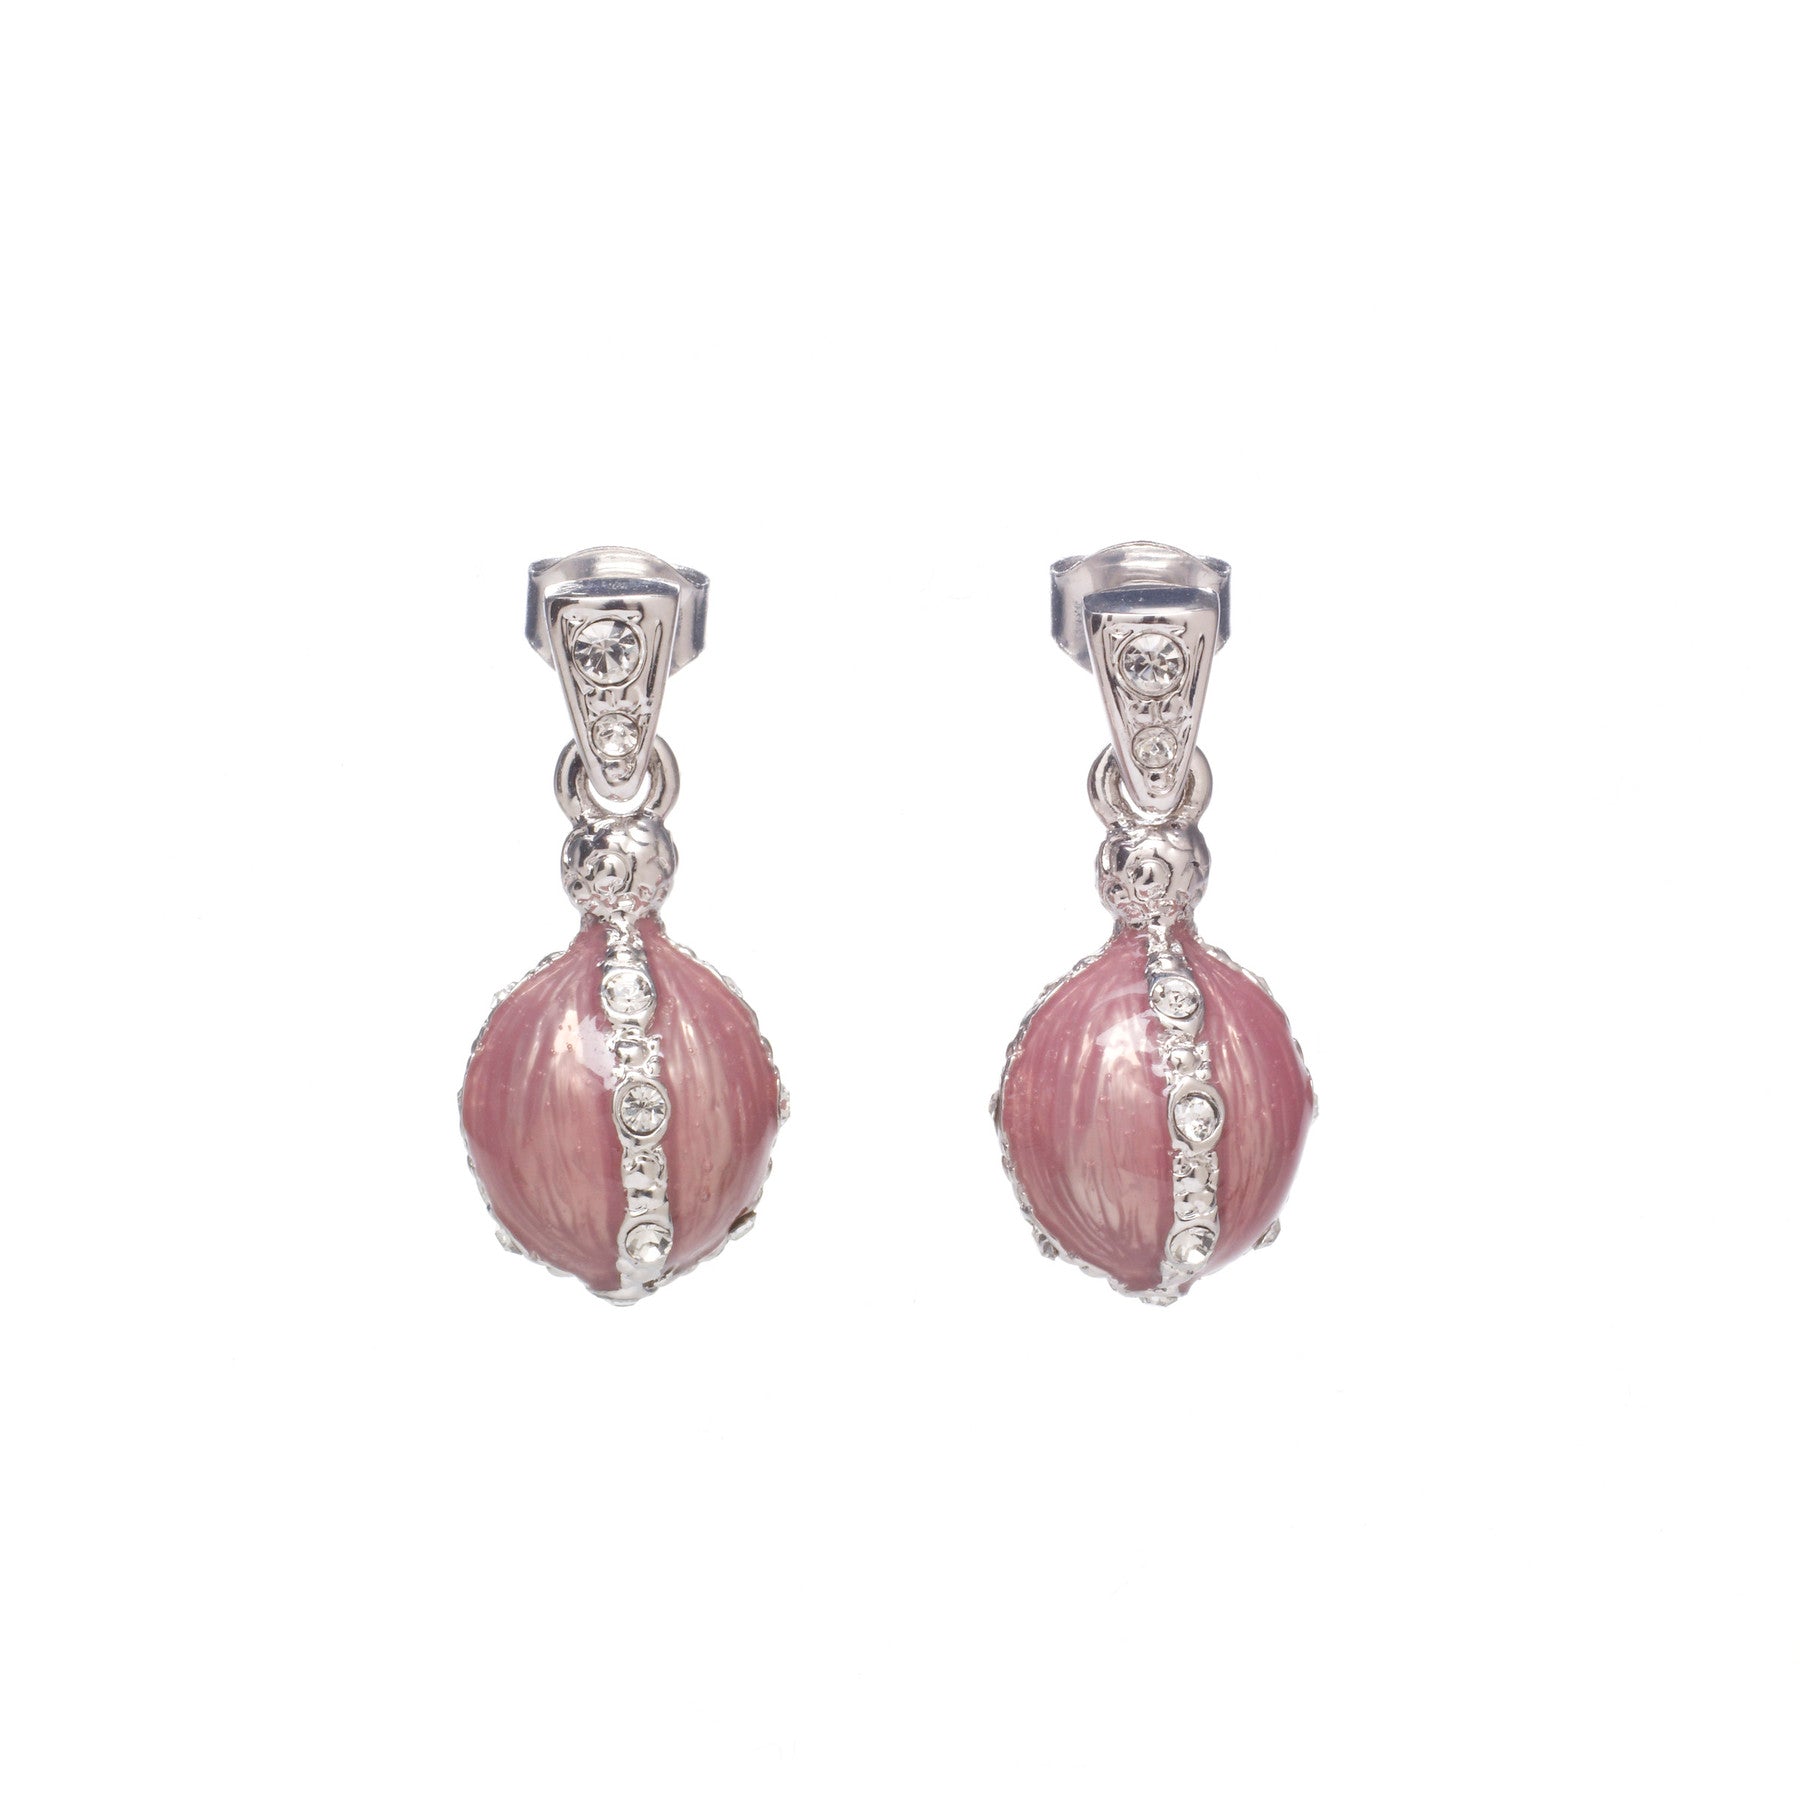 Egg in a Jeweled Cage Earrings